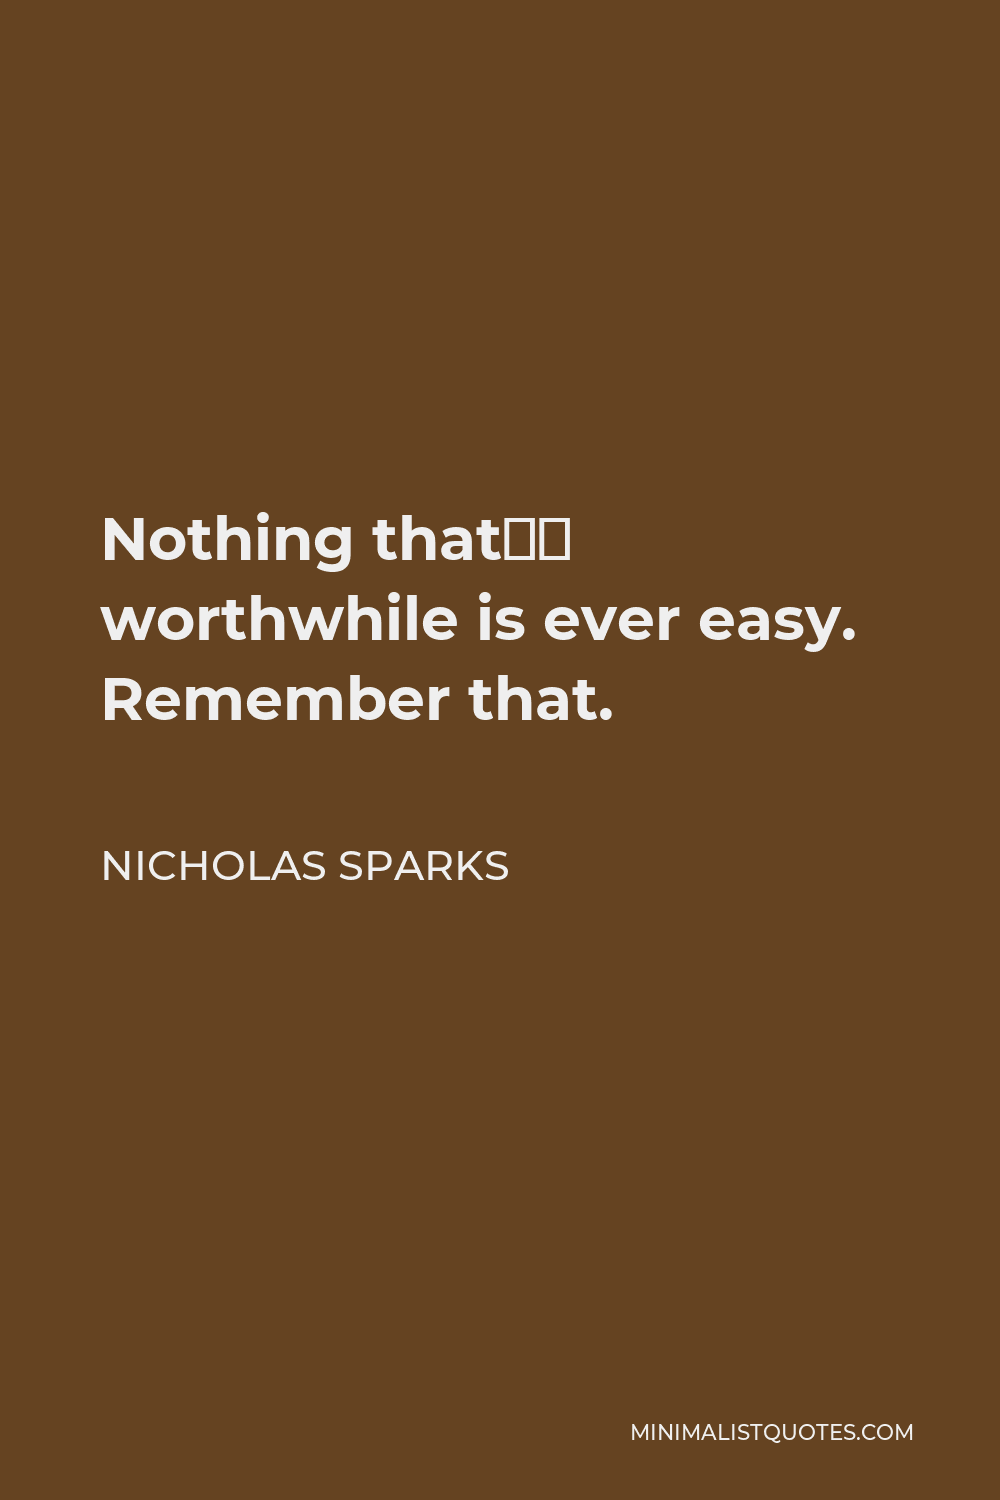 Nicholas Sparks Quote - Nothing that’s worthwhile is ever easy. Remember that.